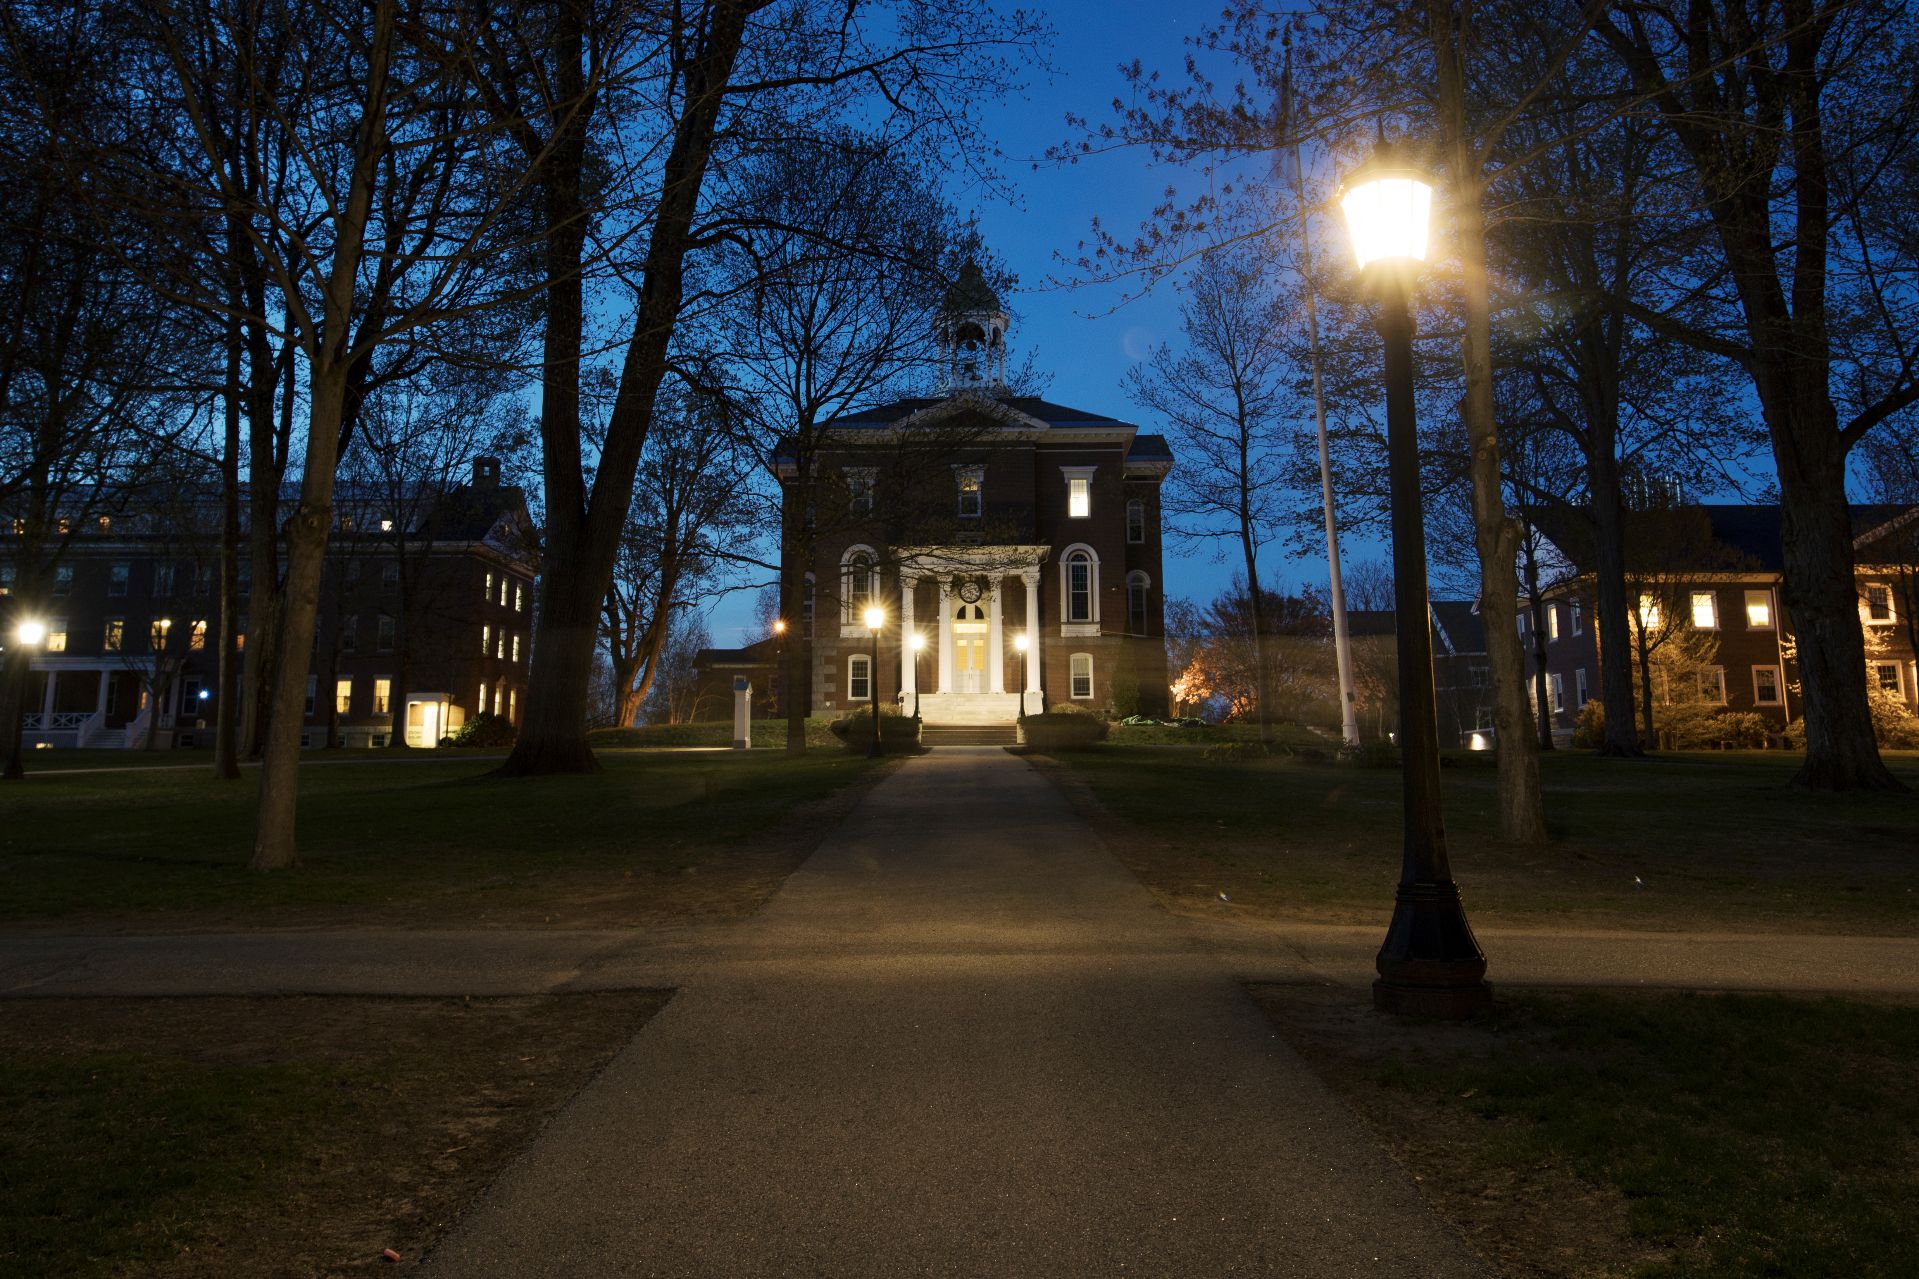 Bates at Night: In a spring twilight News Bates College